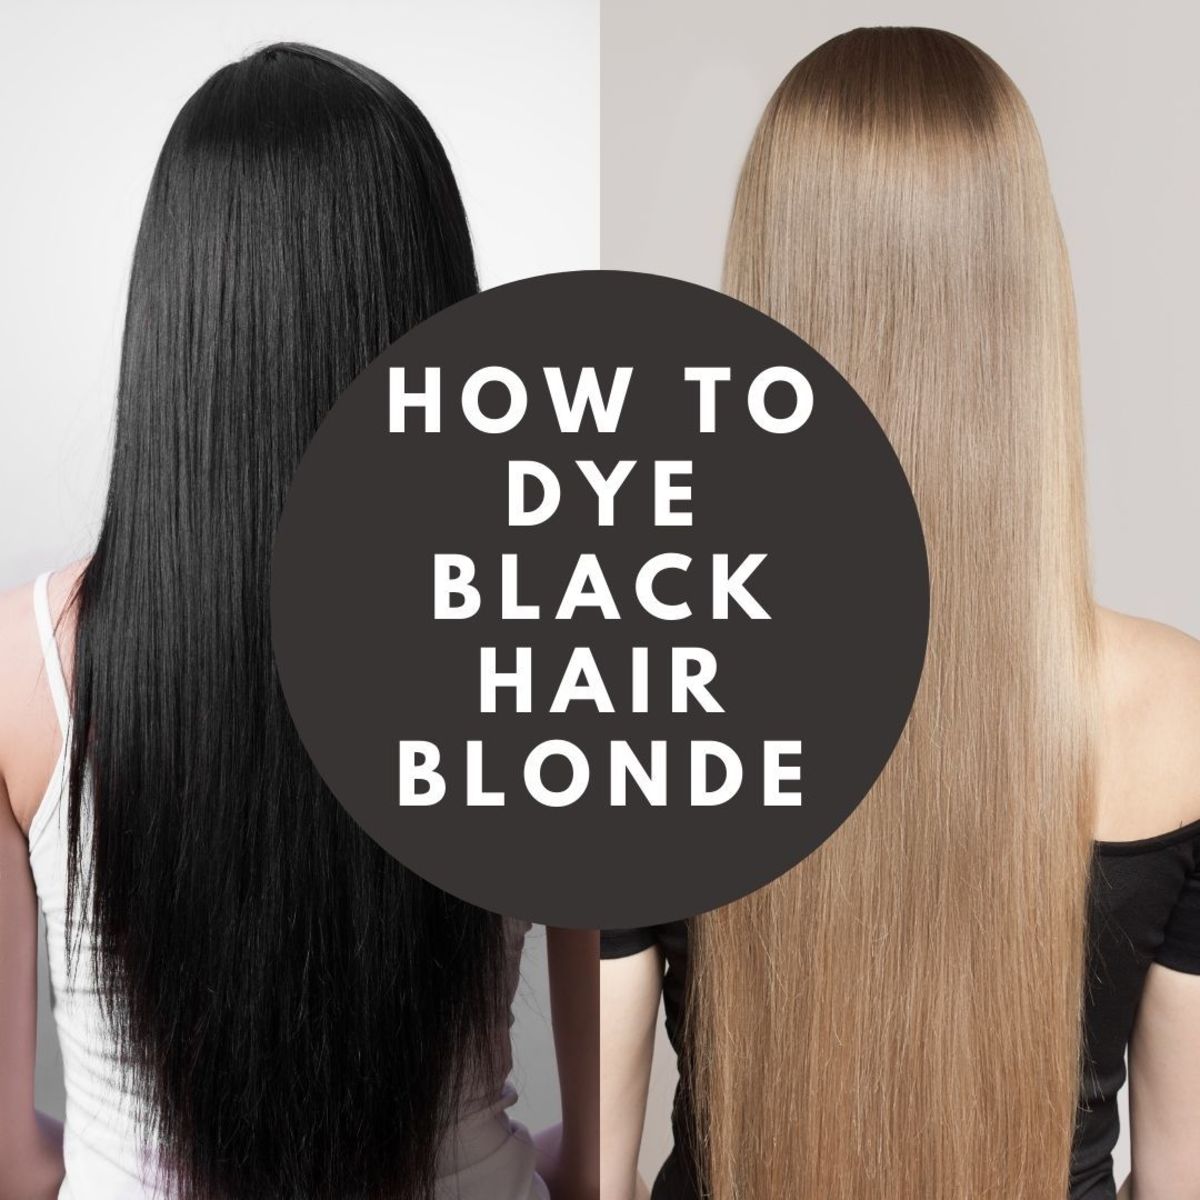 Are you wanting to dye your black hair blonde, but are afraid to? Read on to learn how to do it right.